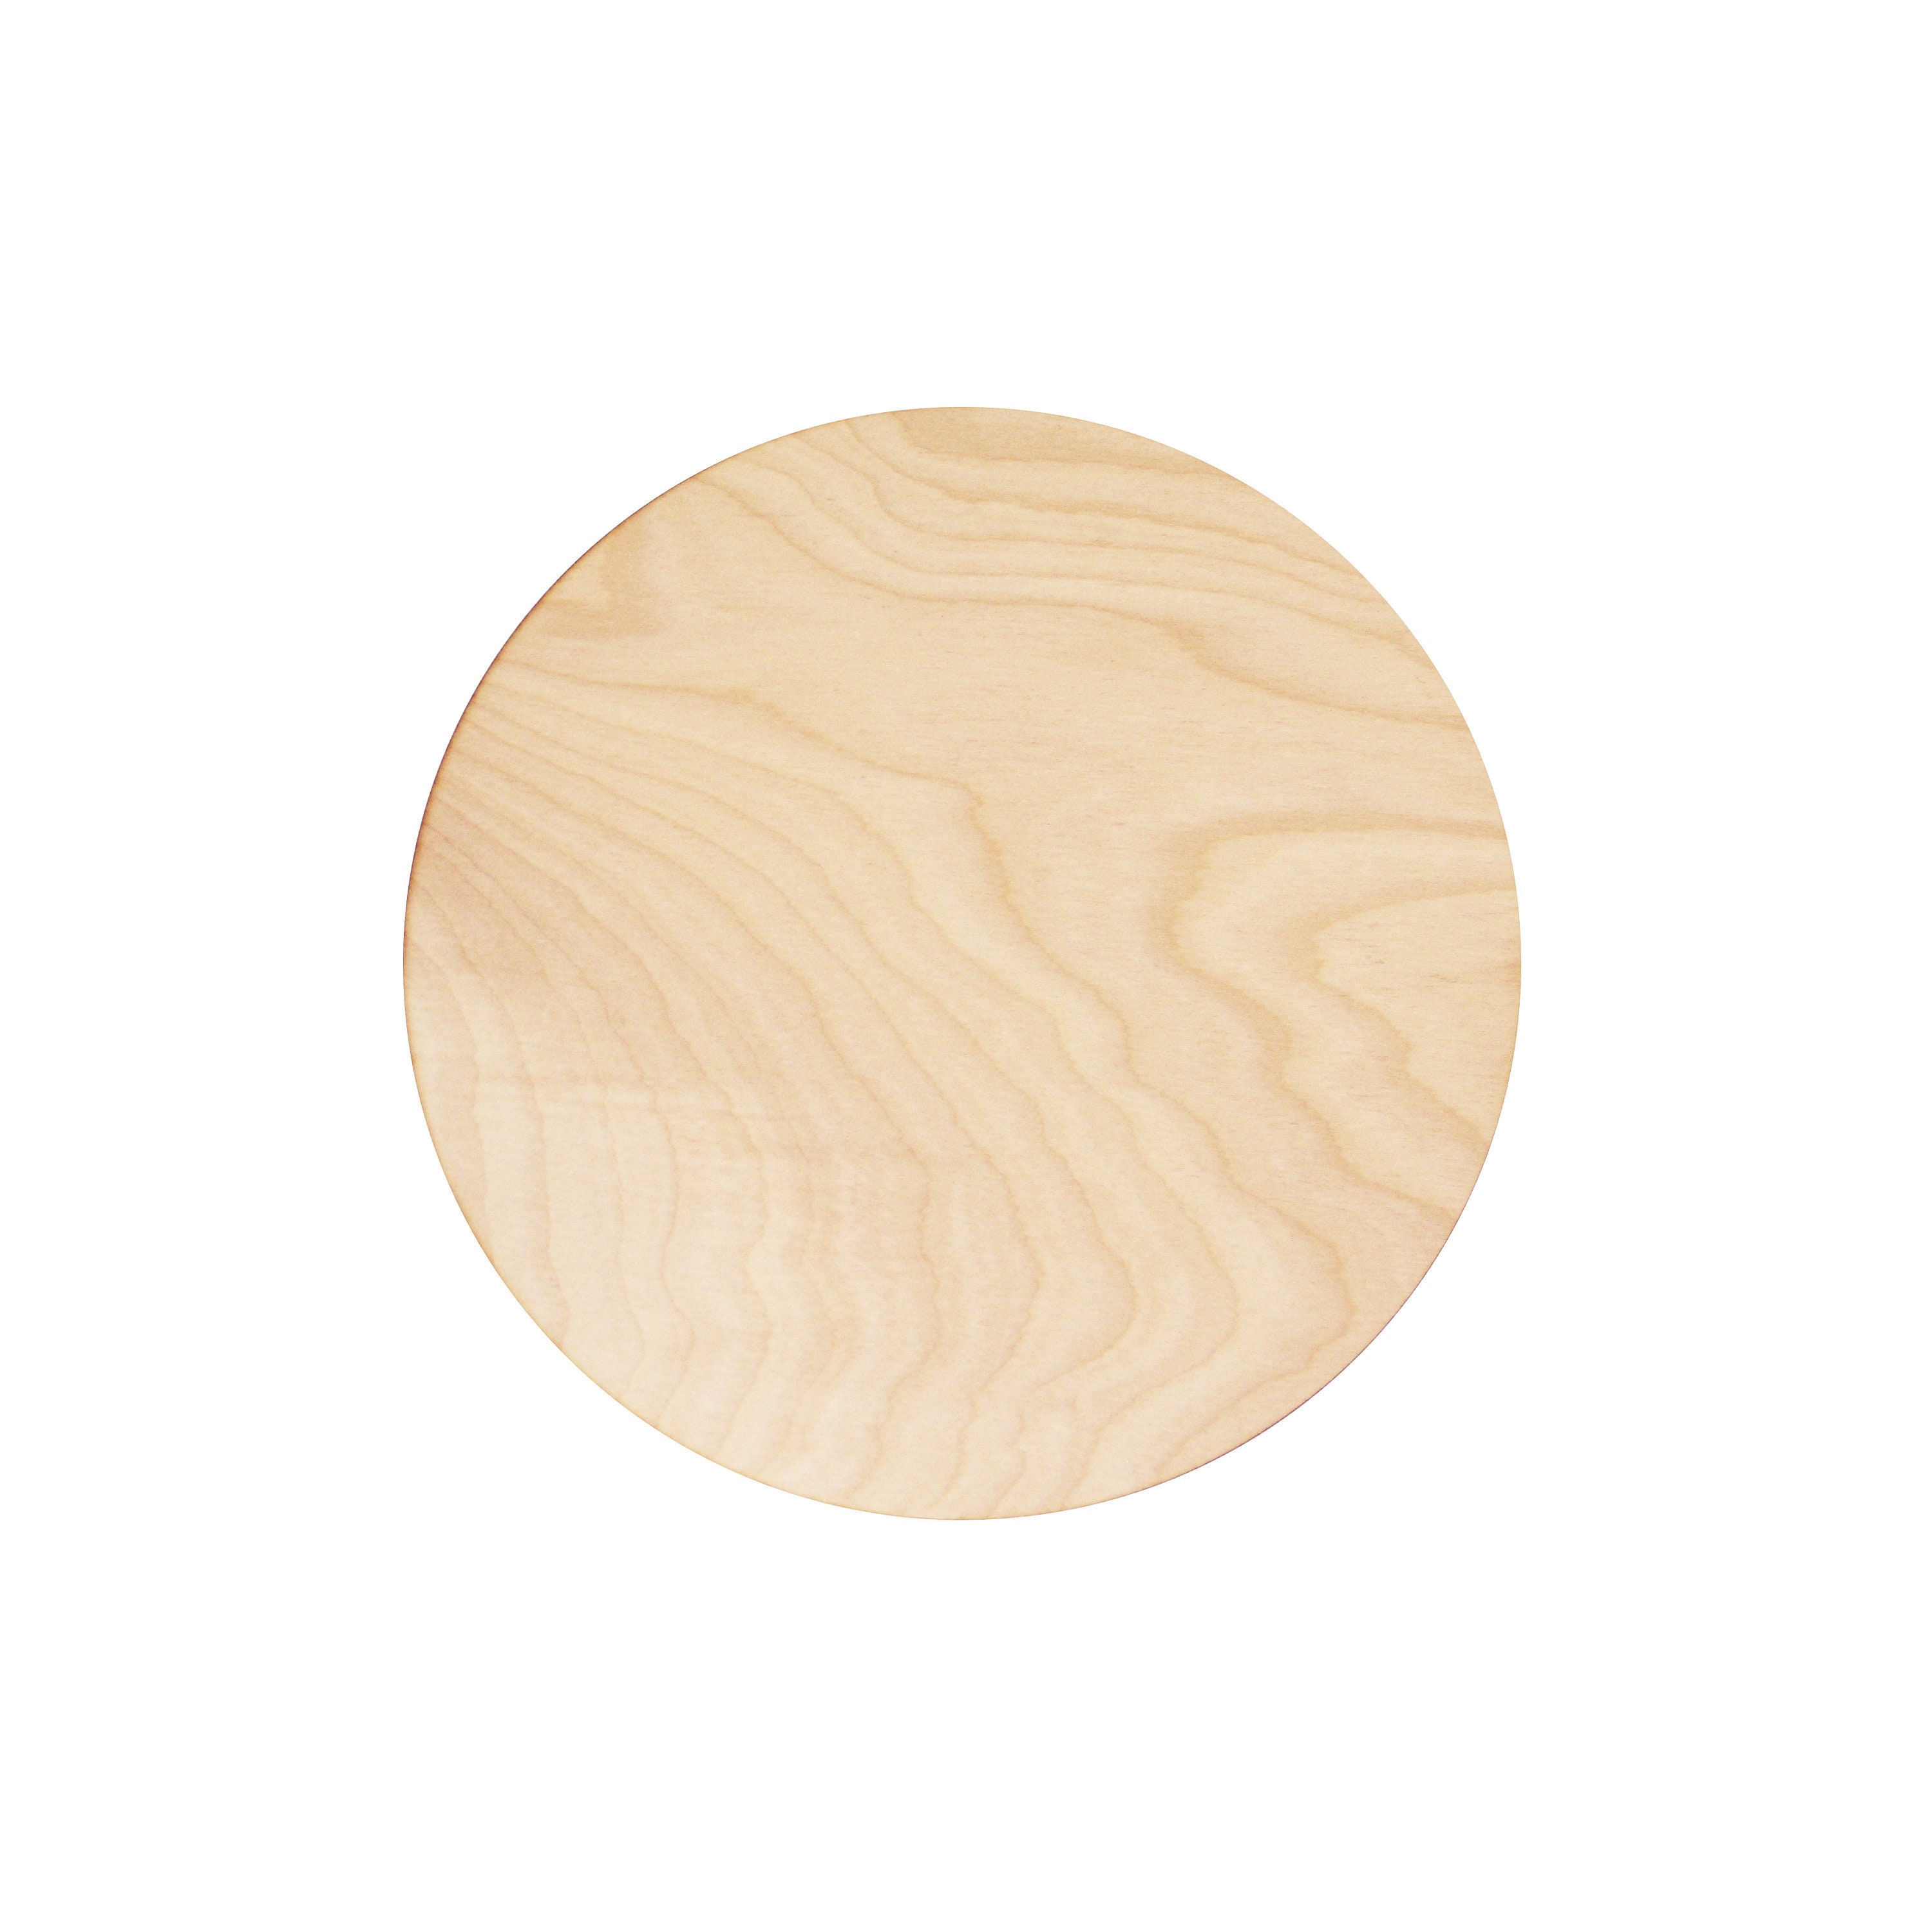 Wood Circles 14 inch, 1/4 Inch Thick, Birch Plywood Discs, Pack of 5  Unfinished Wood Circles for Crafts, Wood Rounds by Woodpeckers